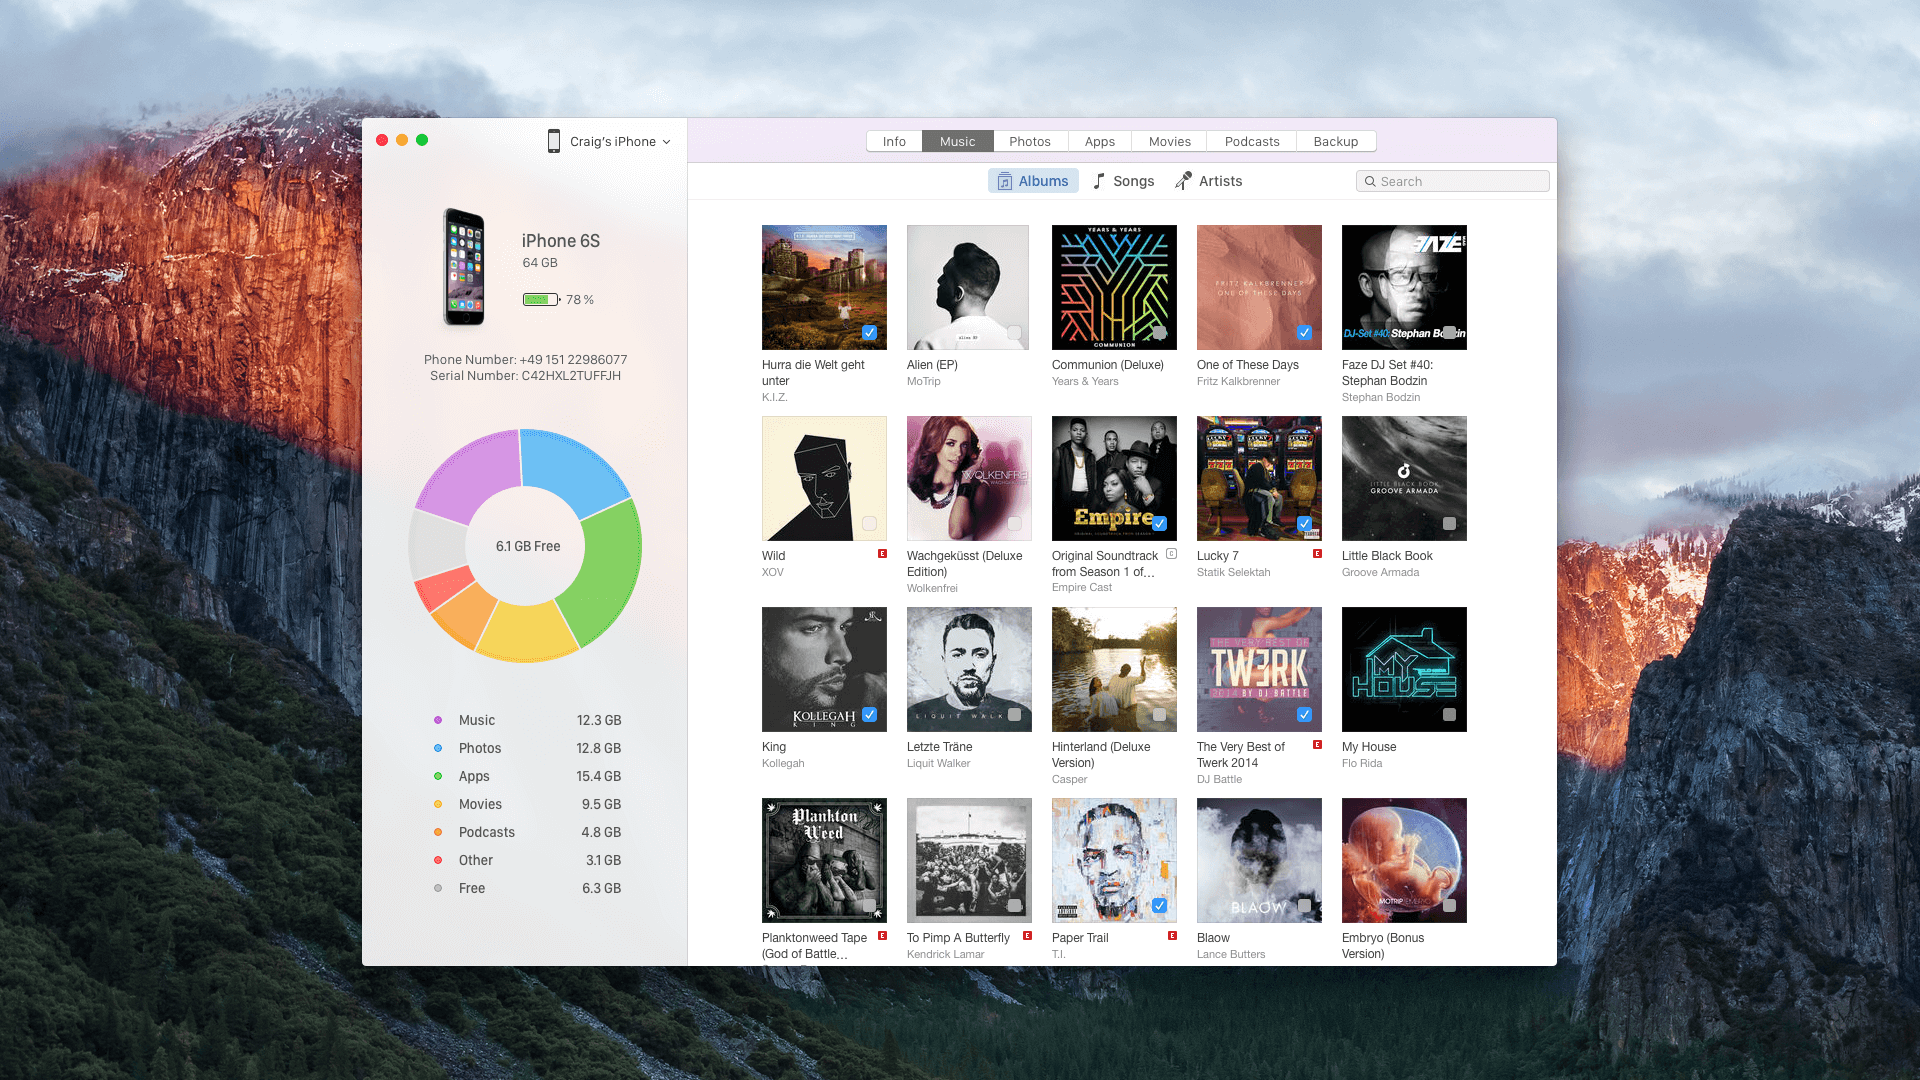 iTunes Redesigned as “Sync” by Constantin Eichstaedt